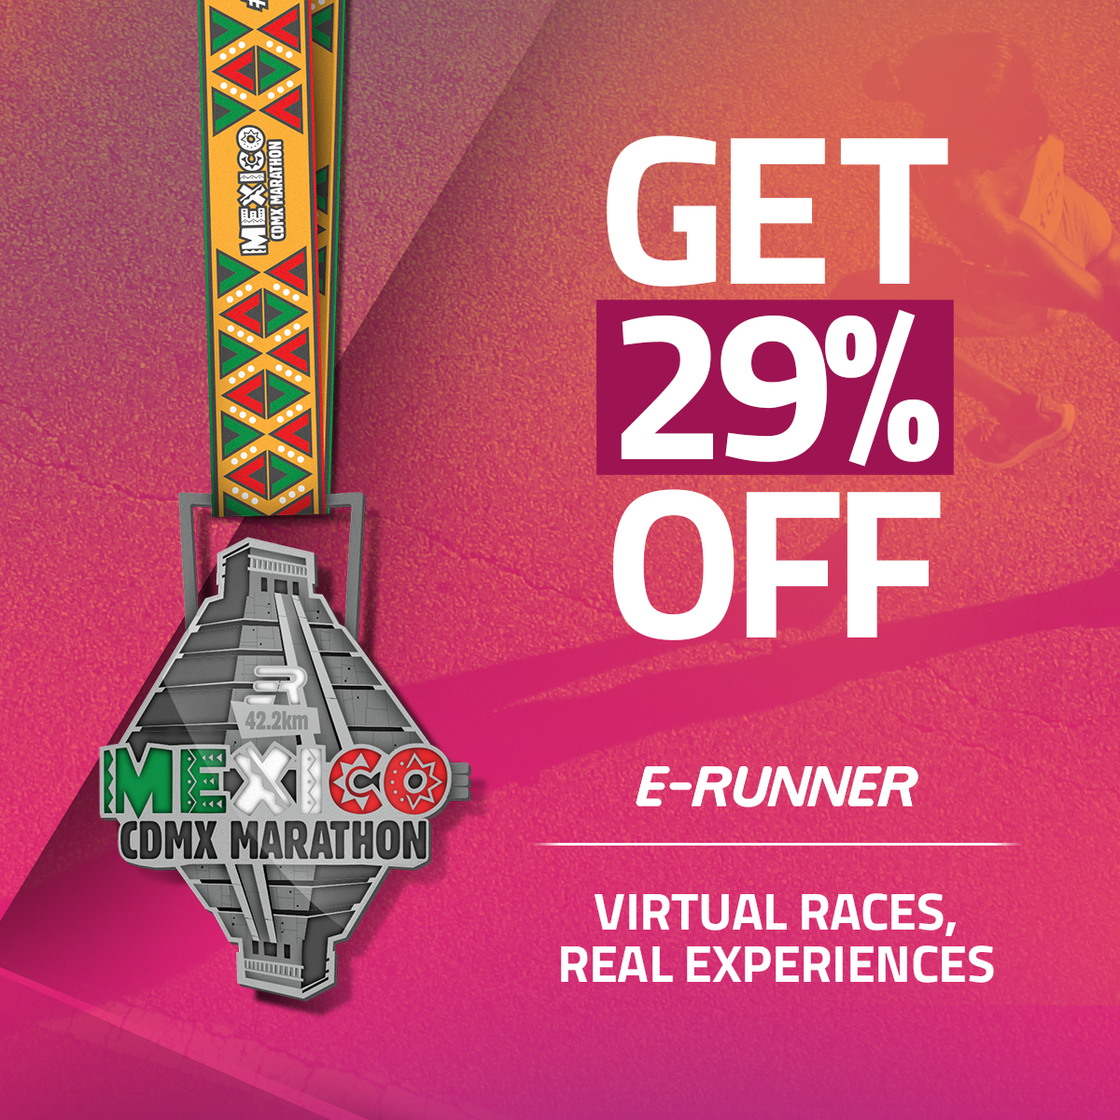 SPECIAL OFFER: Stunning Medal + Official T-Shirt | MEXICO Marathon 2021 | August 28-29th